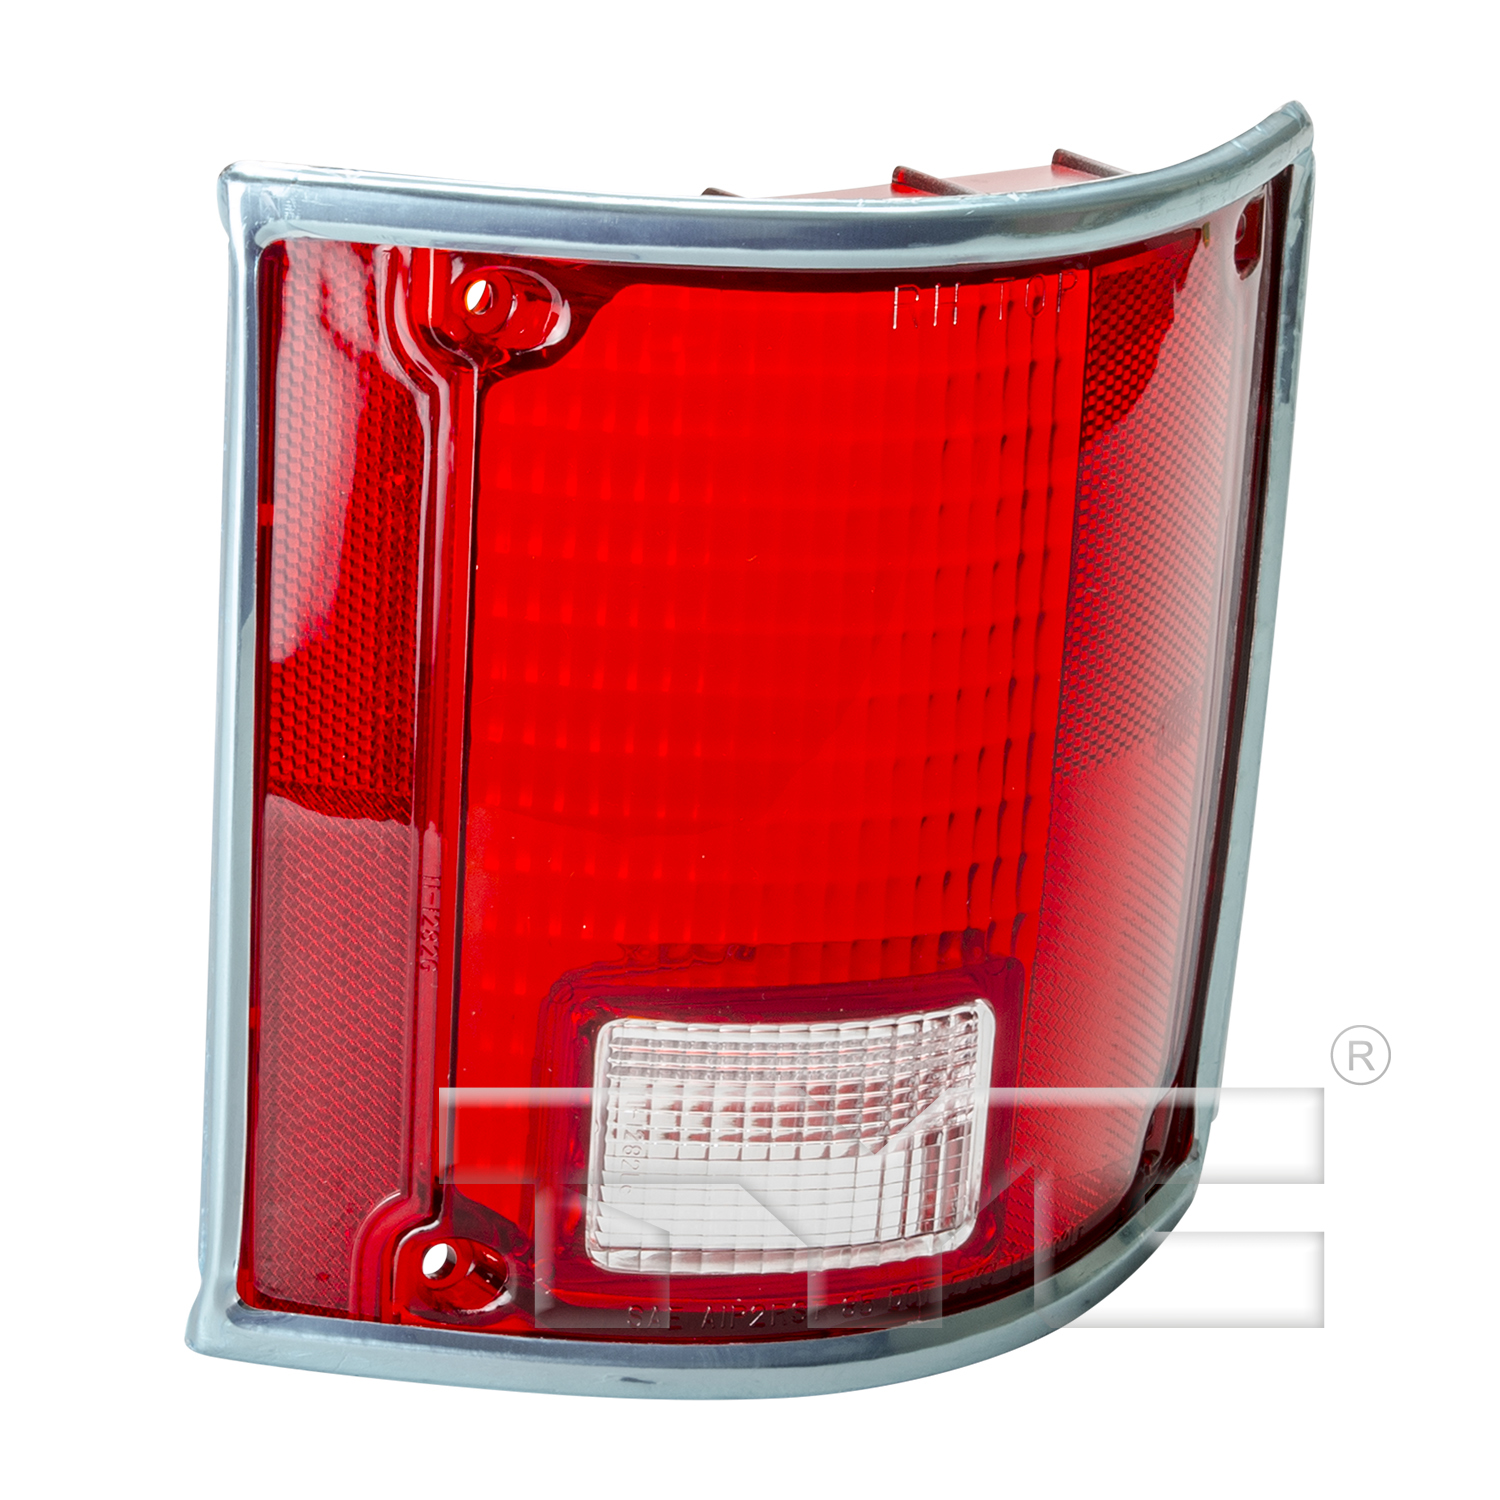 Aftermarket TAILLIGHTS for GMC - K1500, K1500,79-87,RT Taillamp lens